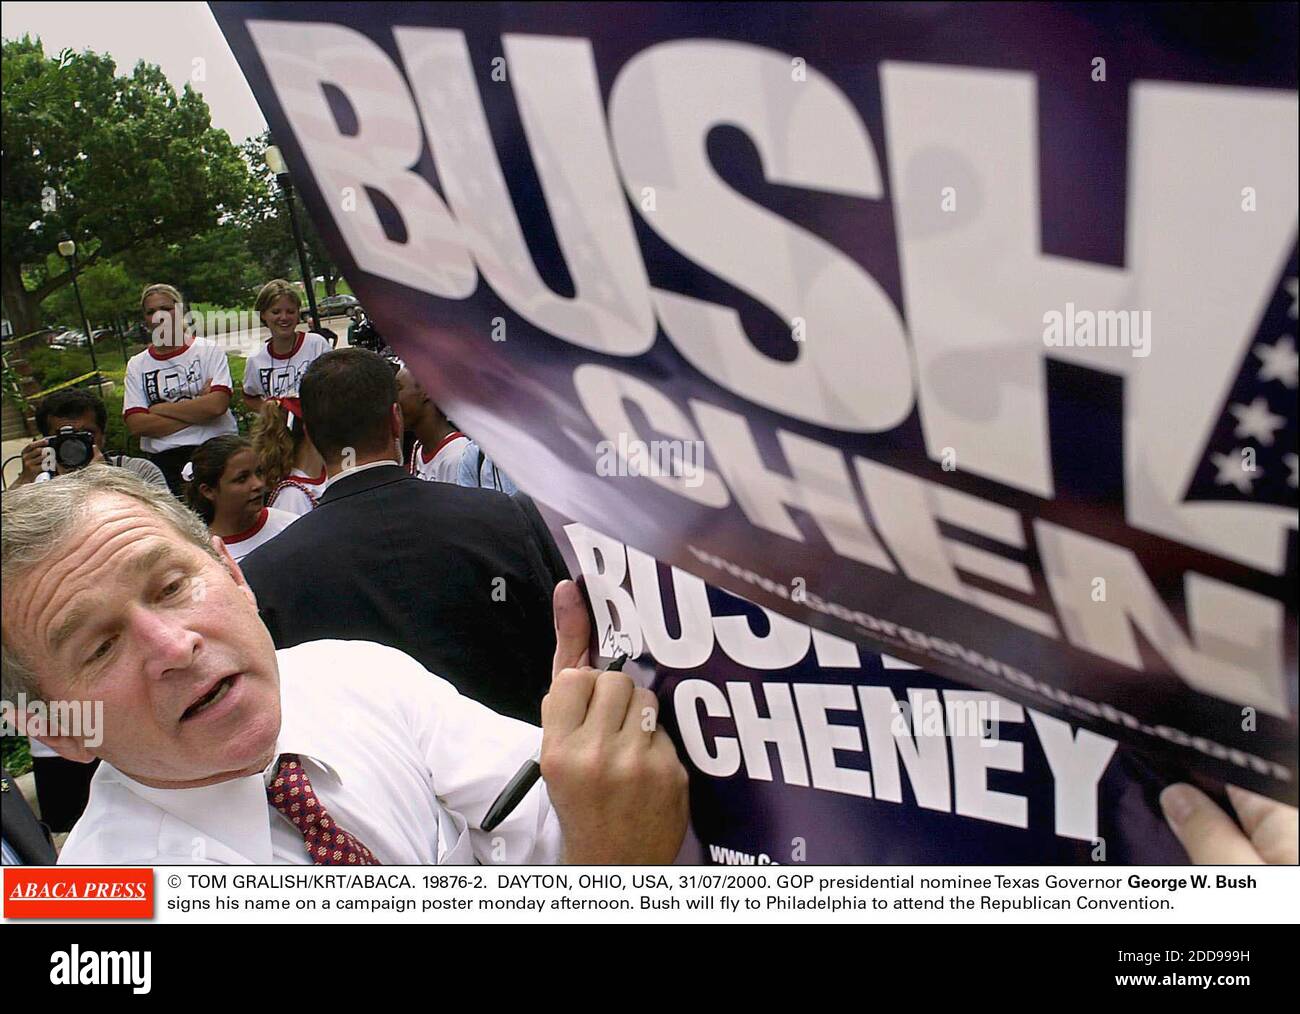 NO FILM, NO VIDEO, NO TV, NO DOCUMENTARY - © TOM GRALISH/KRT/ABACA. 19876-2. DAYTON, OHIO, USA, 31/07/2000. GOP presidential nominee Texas Governor George W. Bush signs his name on a campaign poster monday afternoon. Bush will fly to Philadelphia to attend the Republican Convention. Stock Photo